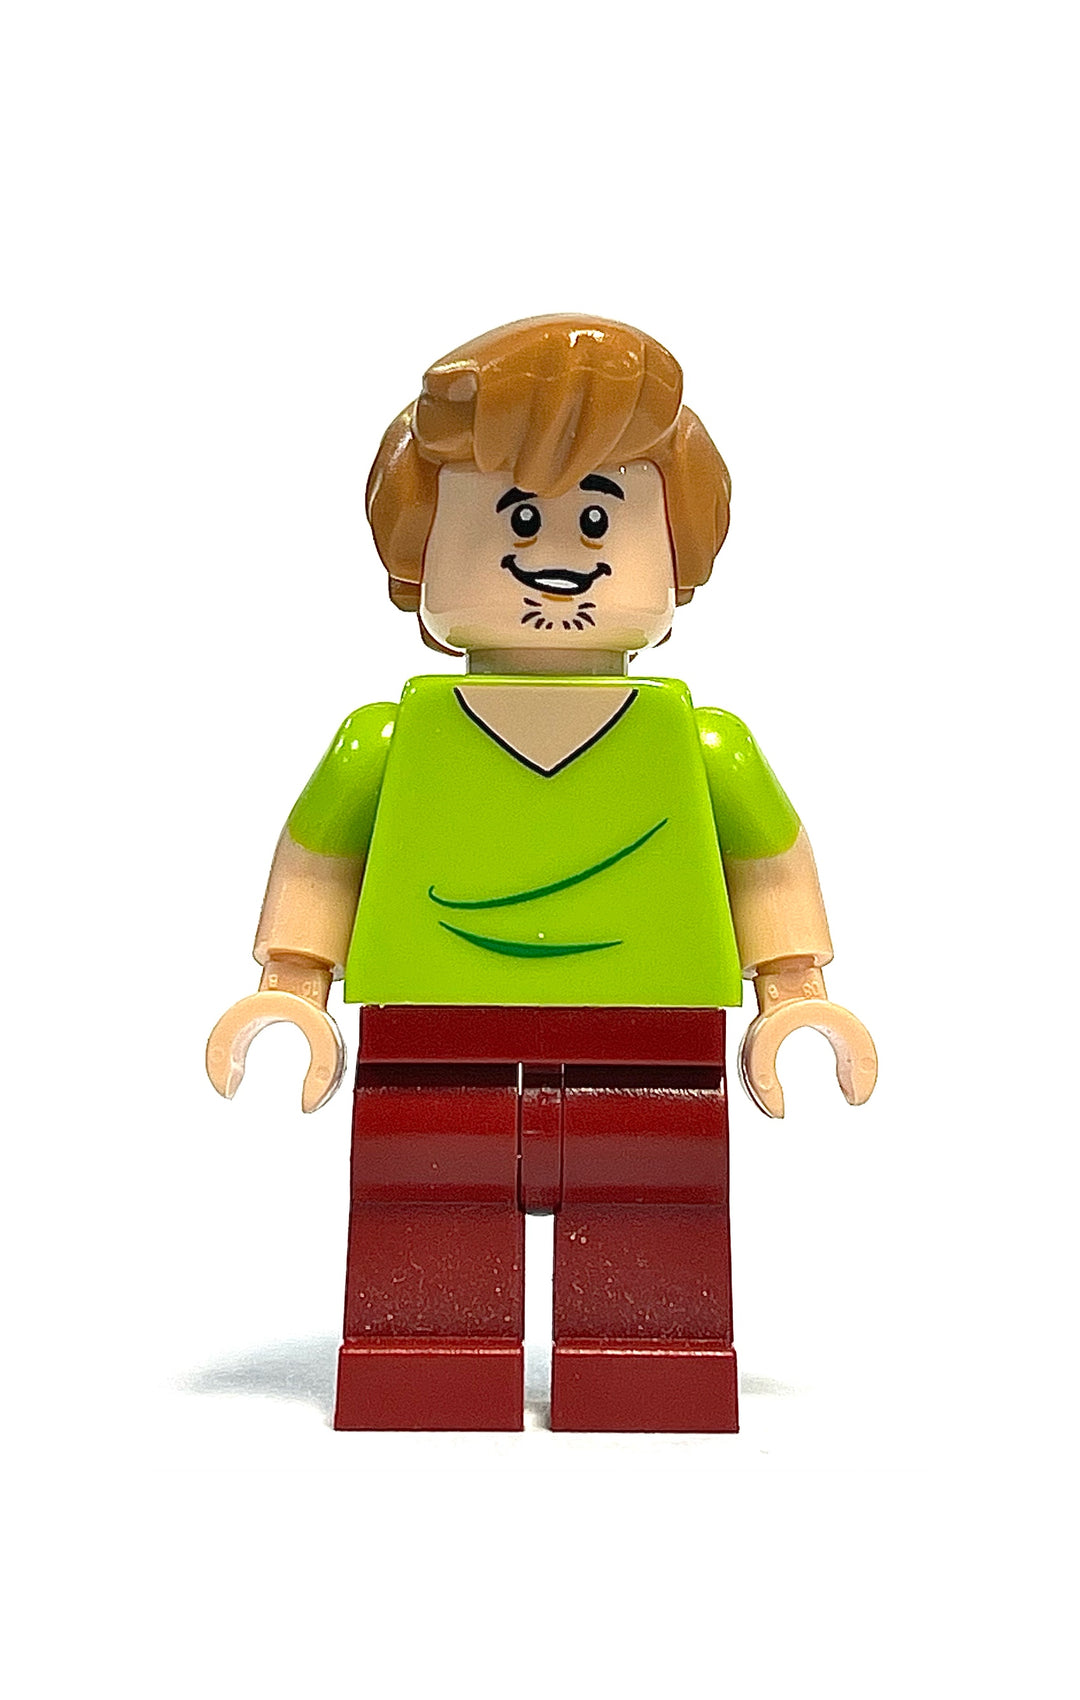 Shaggy Rogers - Open Mouth Grin, scd003